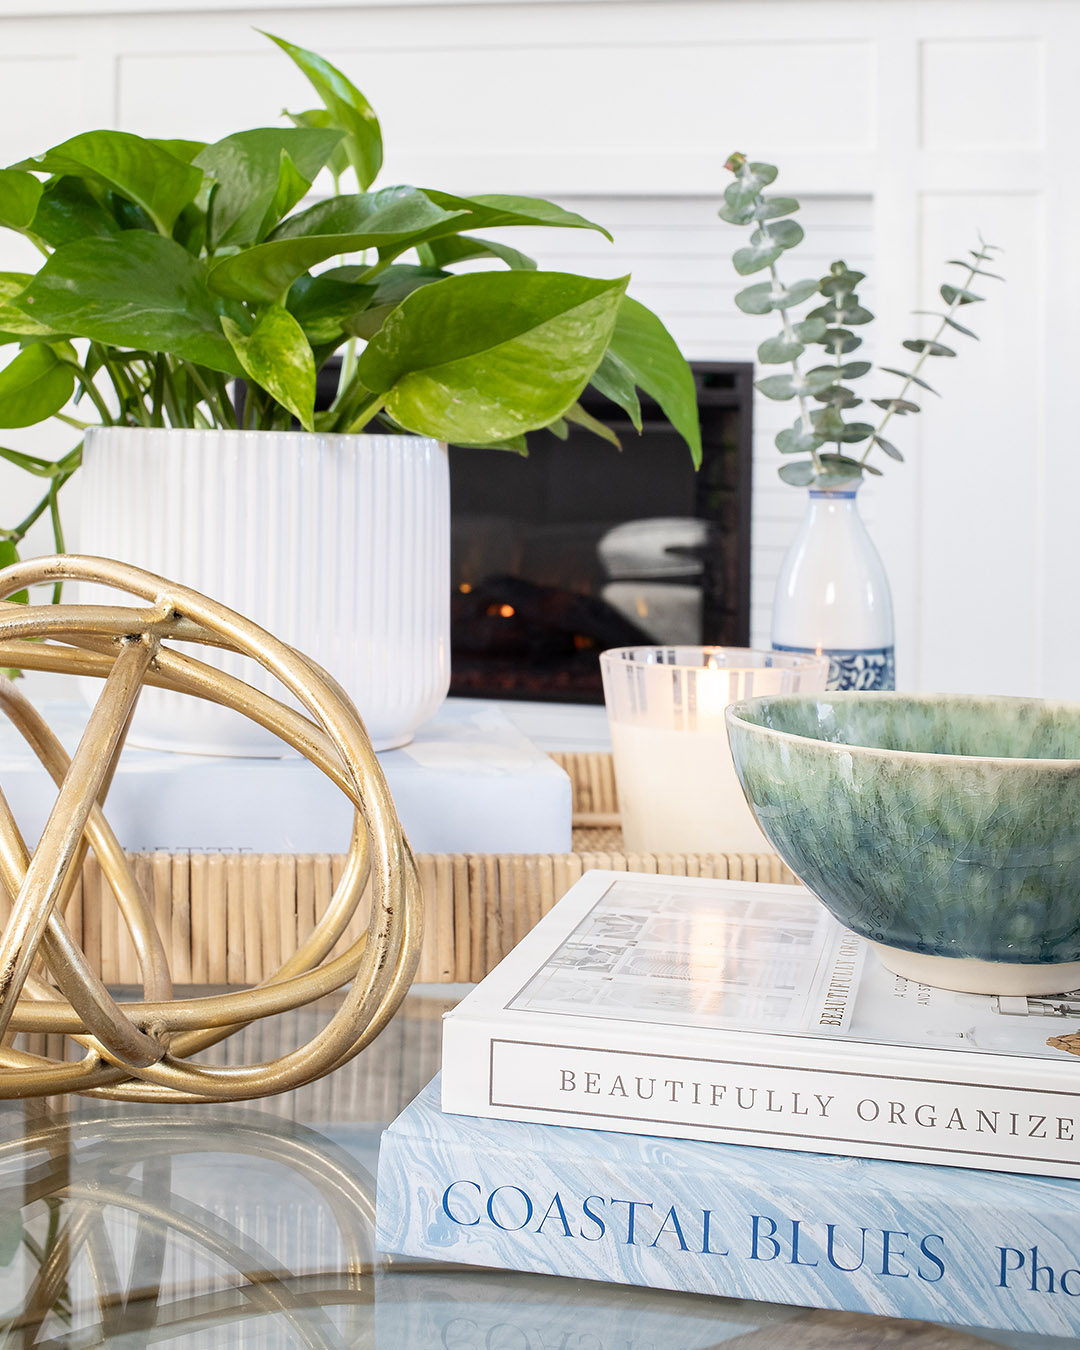 Today I thought I'd share a little peek at what our living room looks like right now and maybe give you a few ideas for styling a small round coffee table.